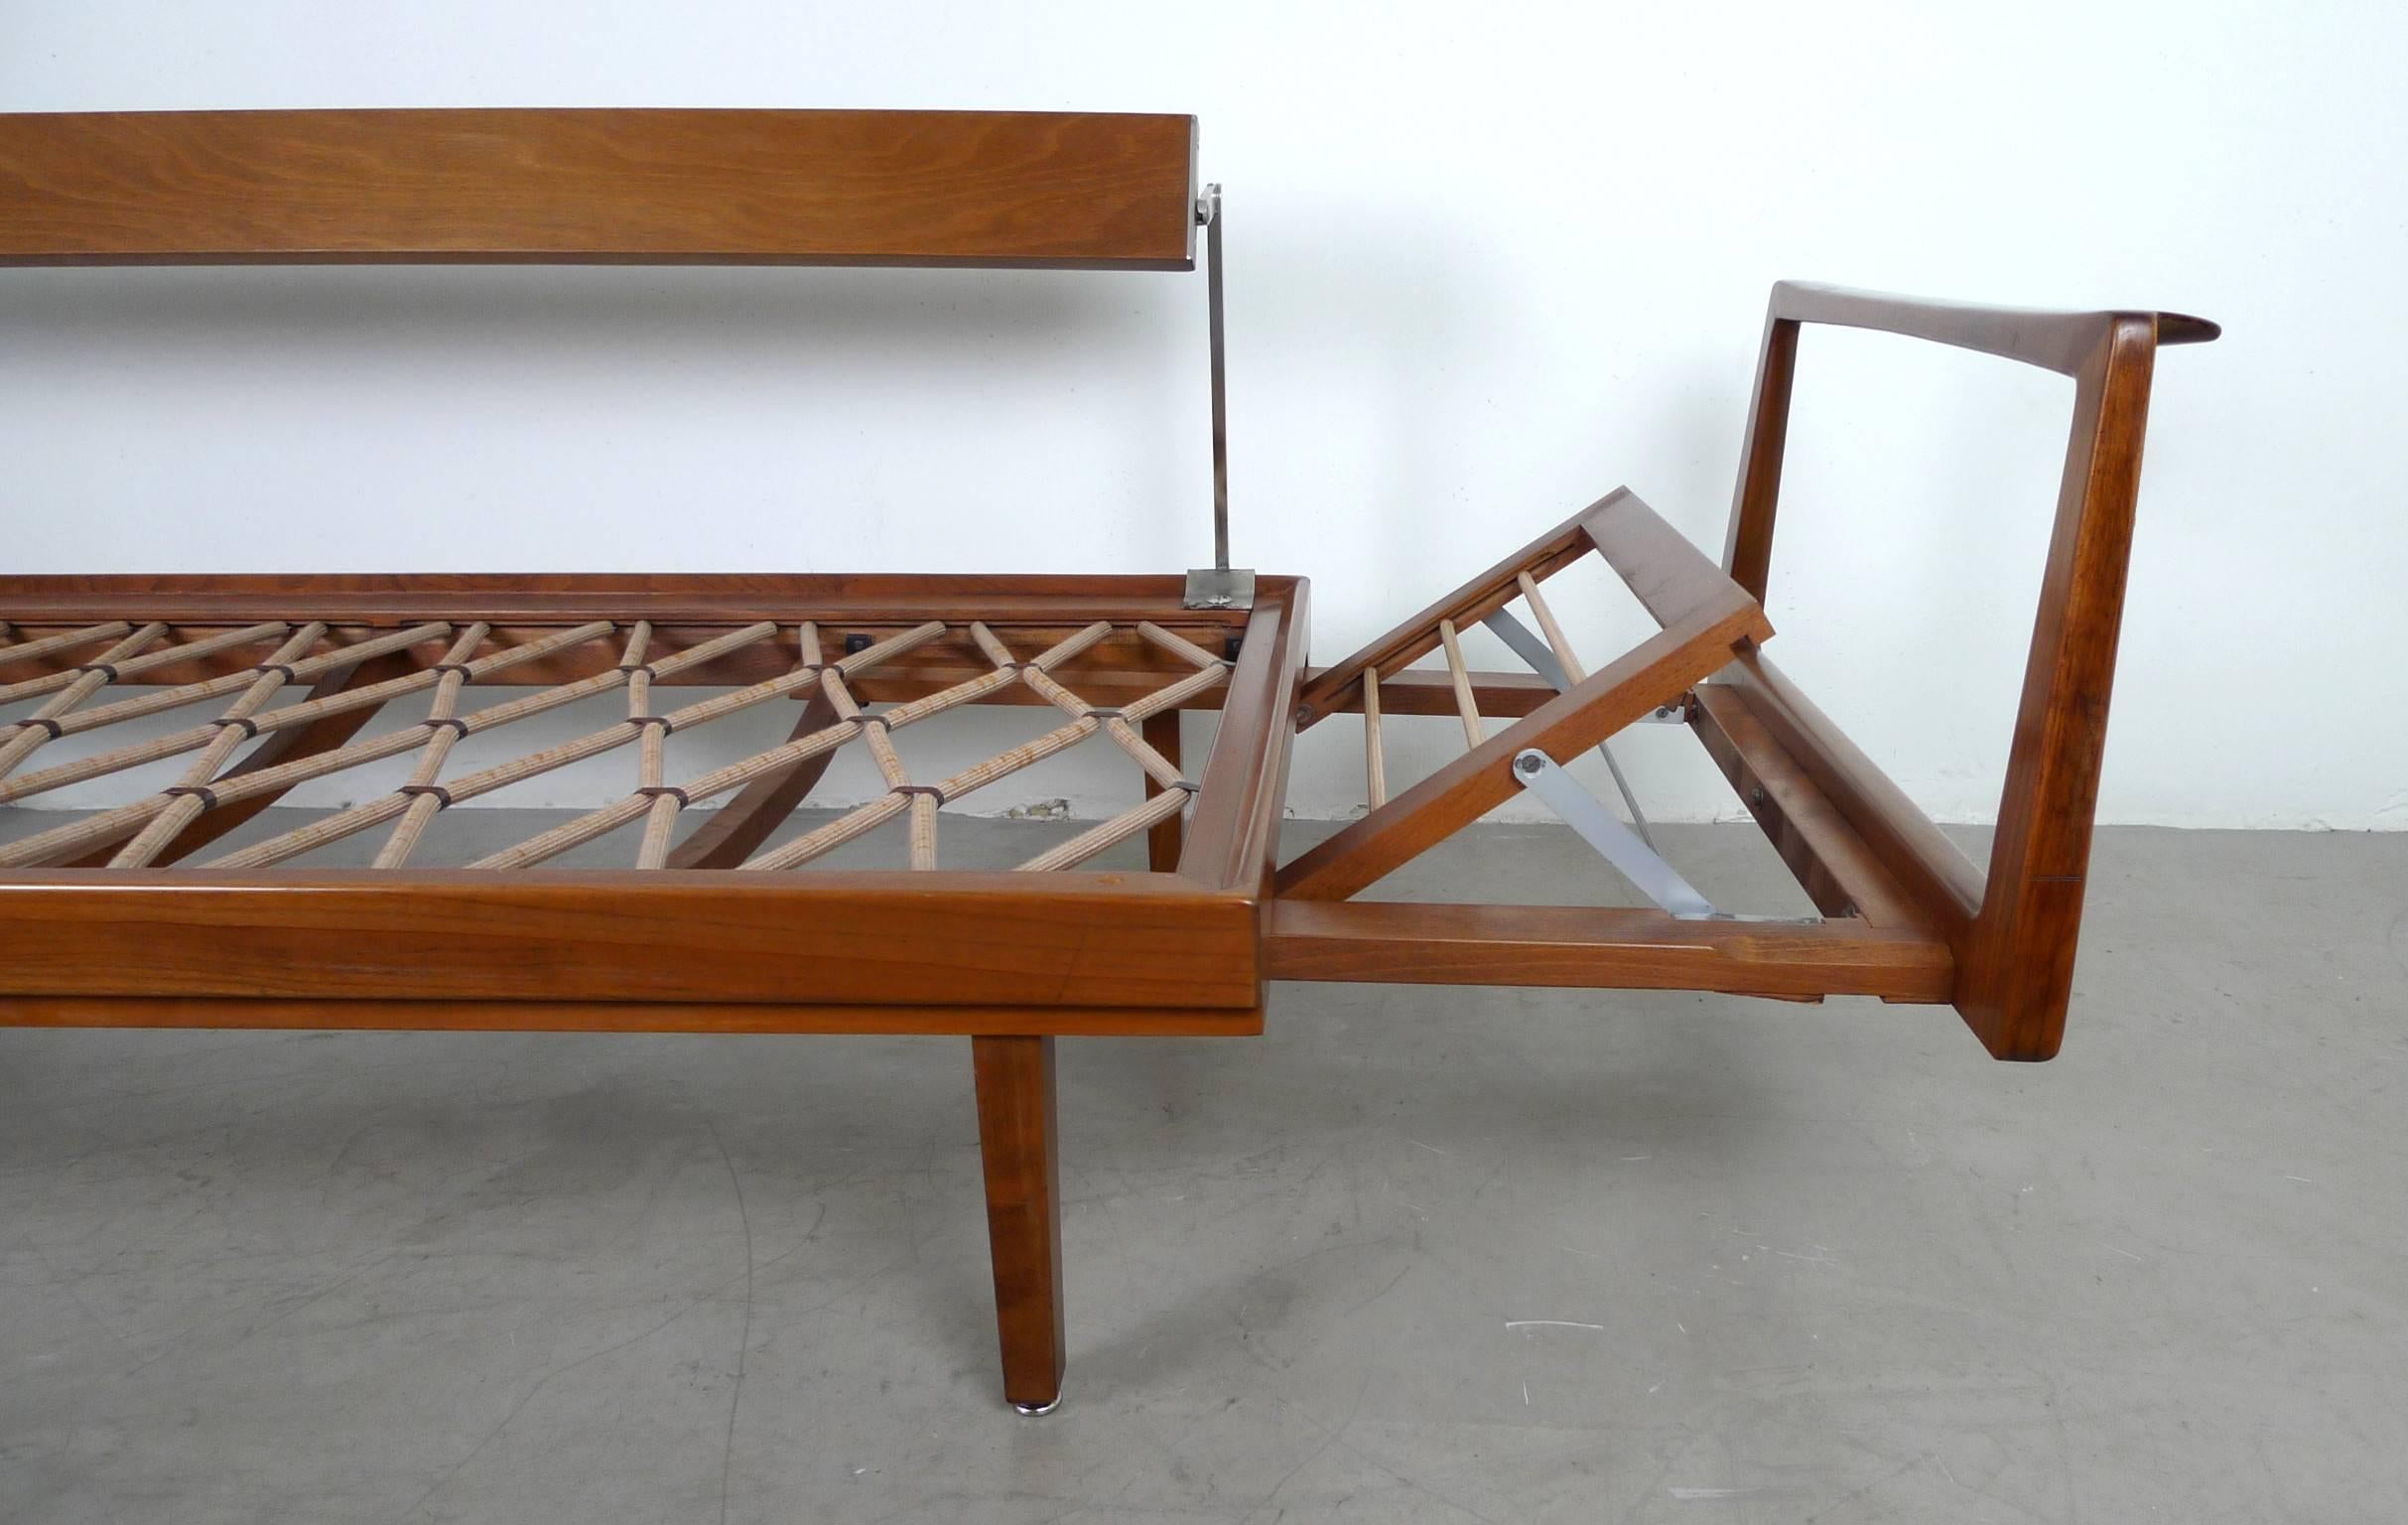 Metal Walter Knoll Sofa Bed with Walnut Frame from the 1950s, Germany